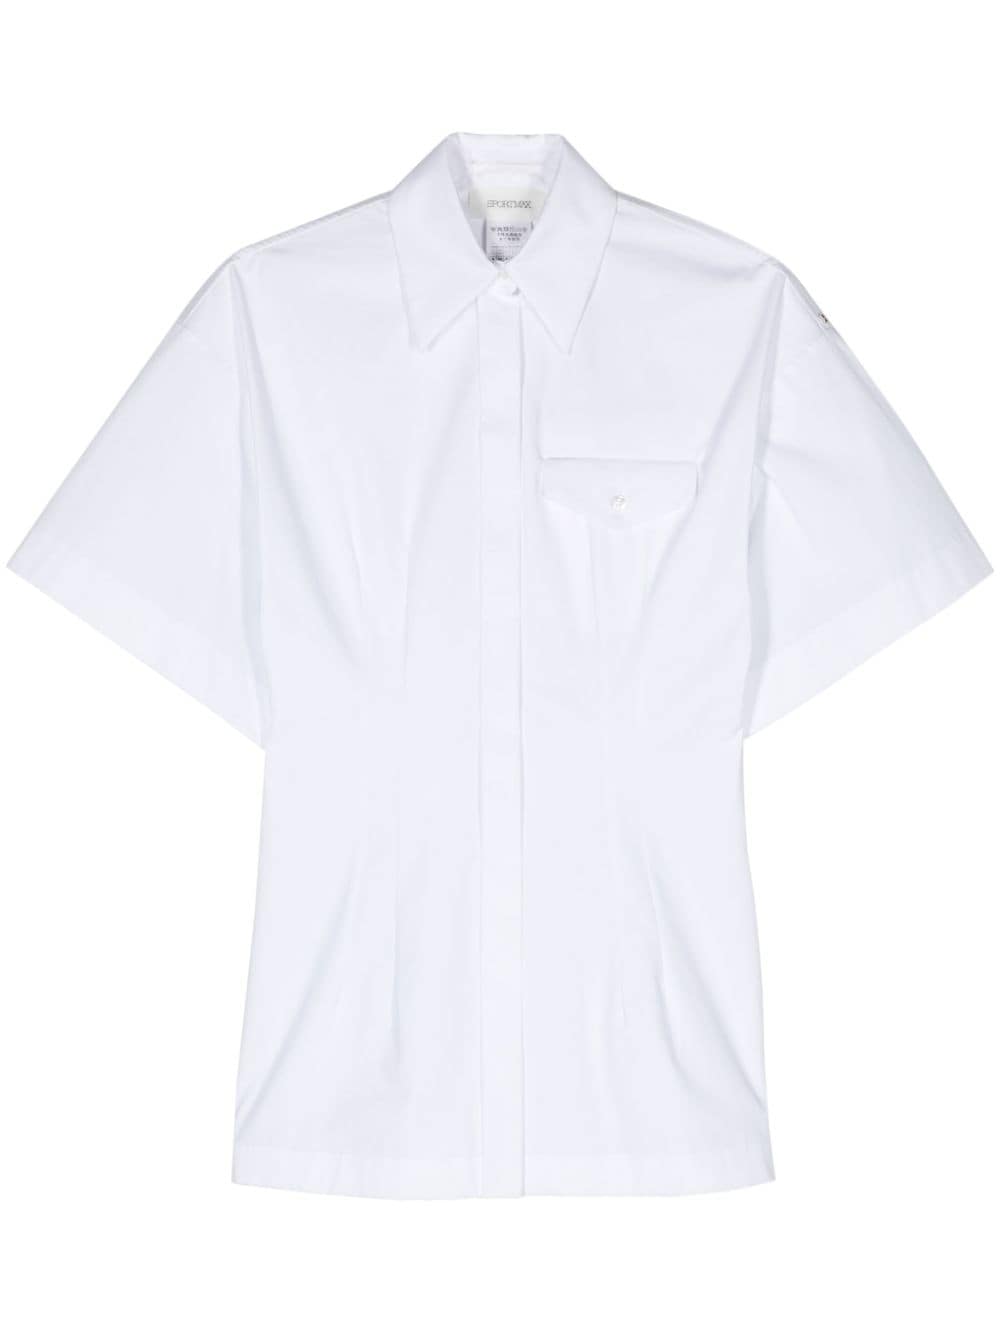 Curve pointed-collar cotton shirt